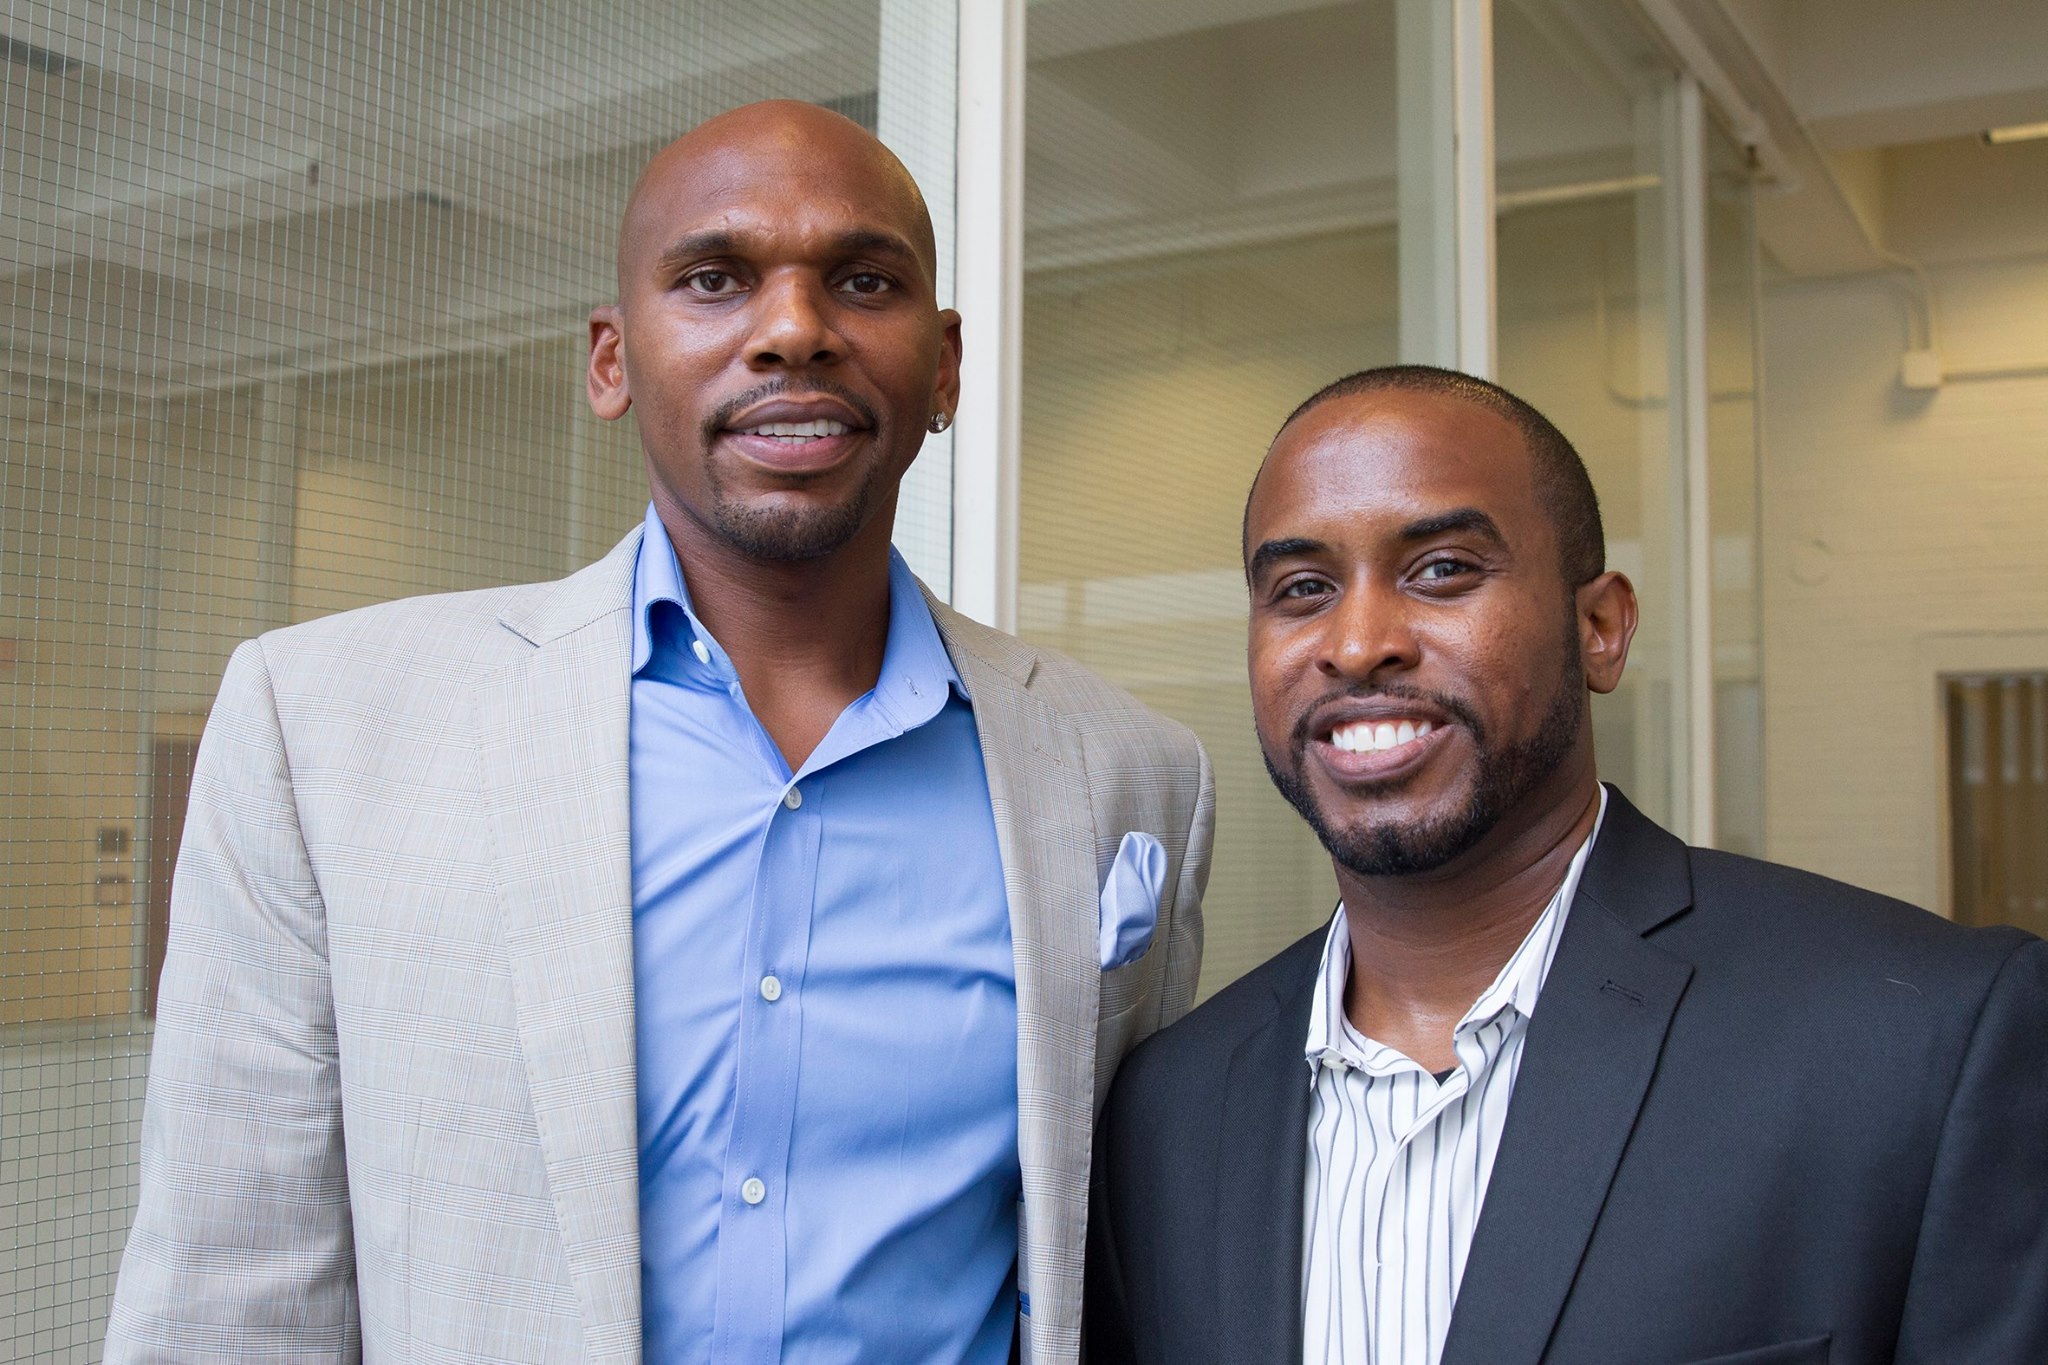 On Aug. 20, 2014, Hussman School adjunct Livis Freeman surprised students in his "Public Relations Case Studies" class with a guest speaker — former NBA player and Tar Heel basketball great Jerry Stackhouse. Freeman explained to students that Stackhouse was his first client. And now Freeman can call Stackhouse his first guest speaker.